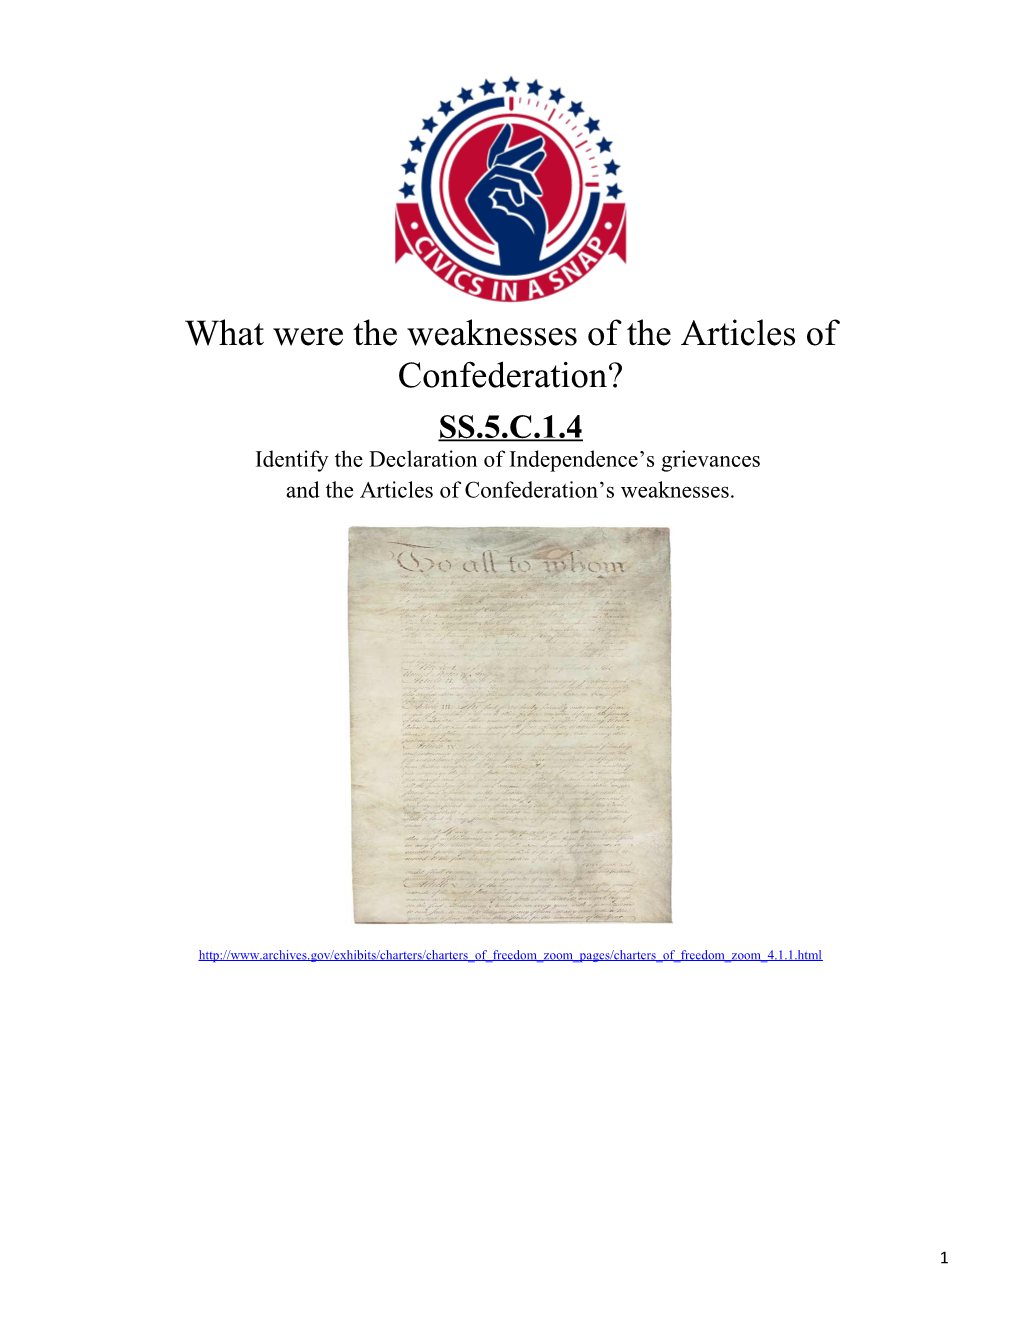 What Were the Weaknesses of the Articles of Confederation?